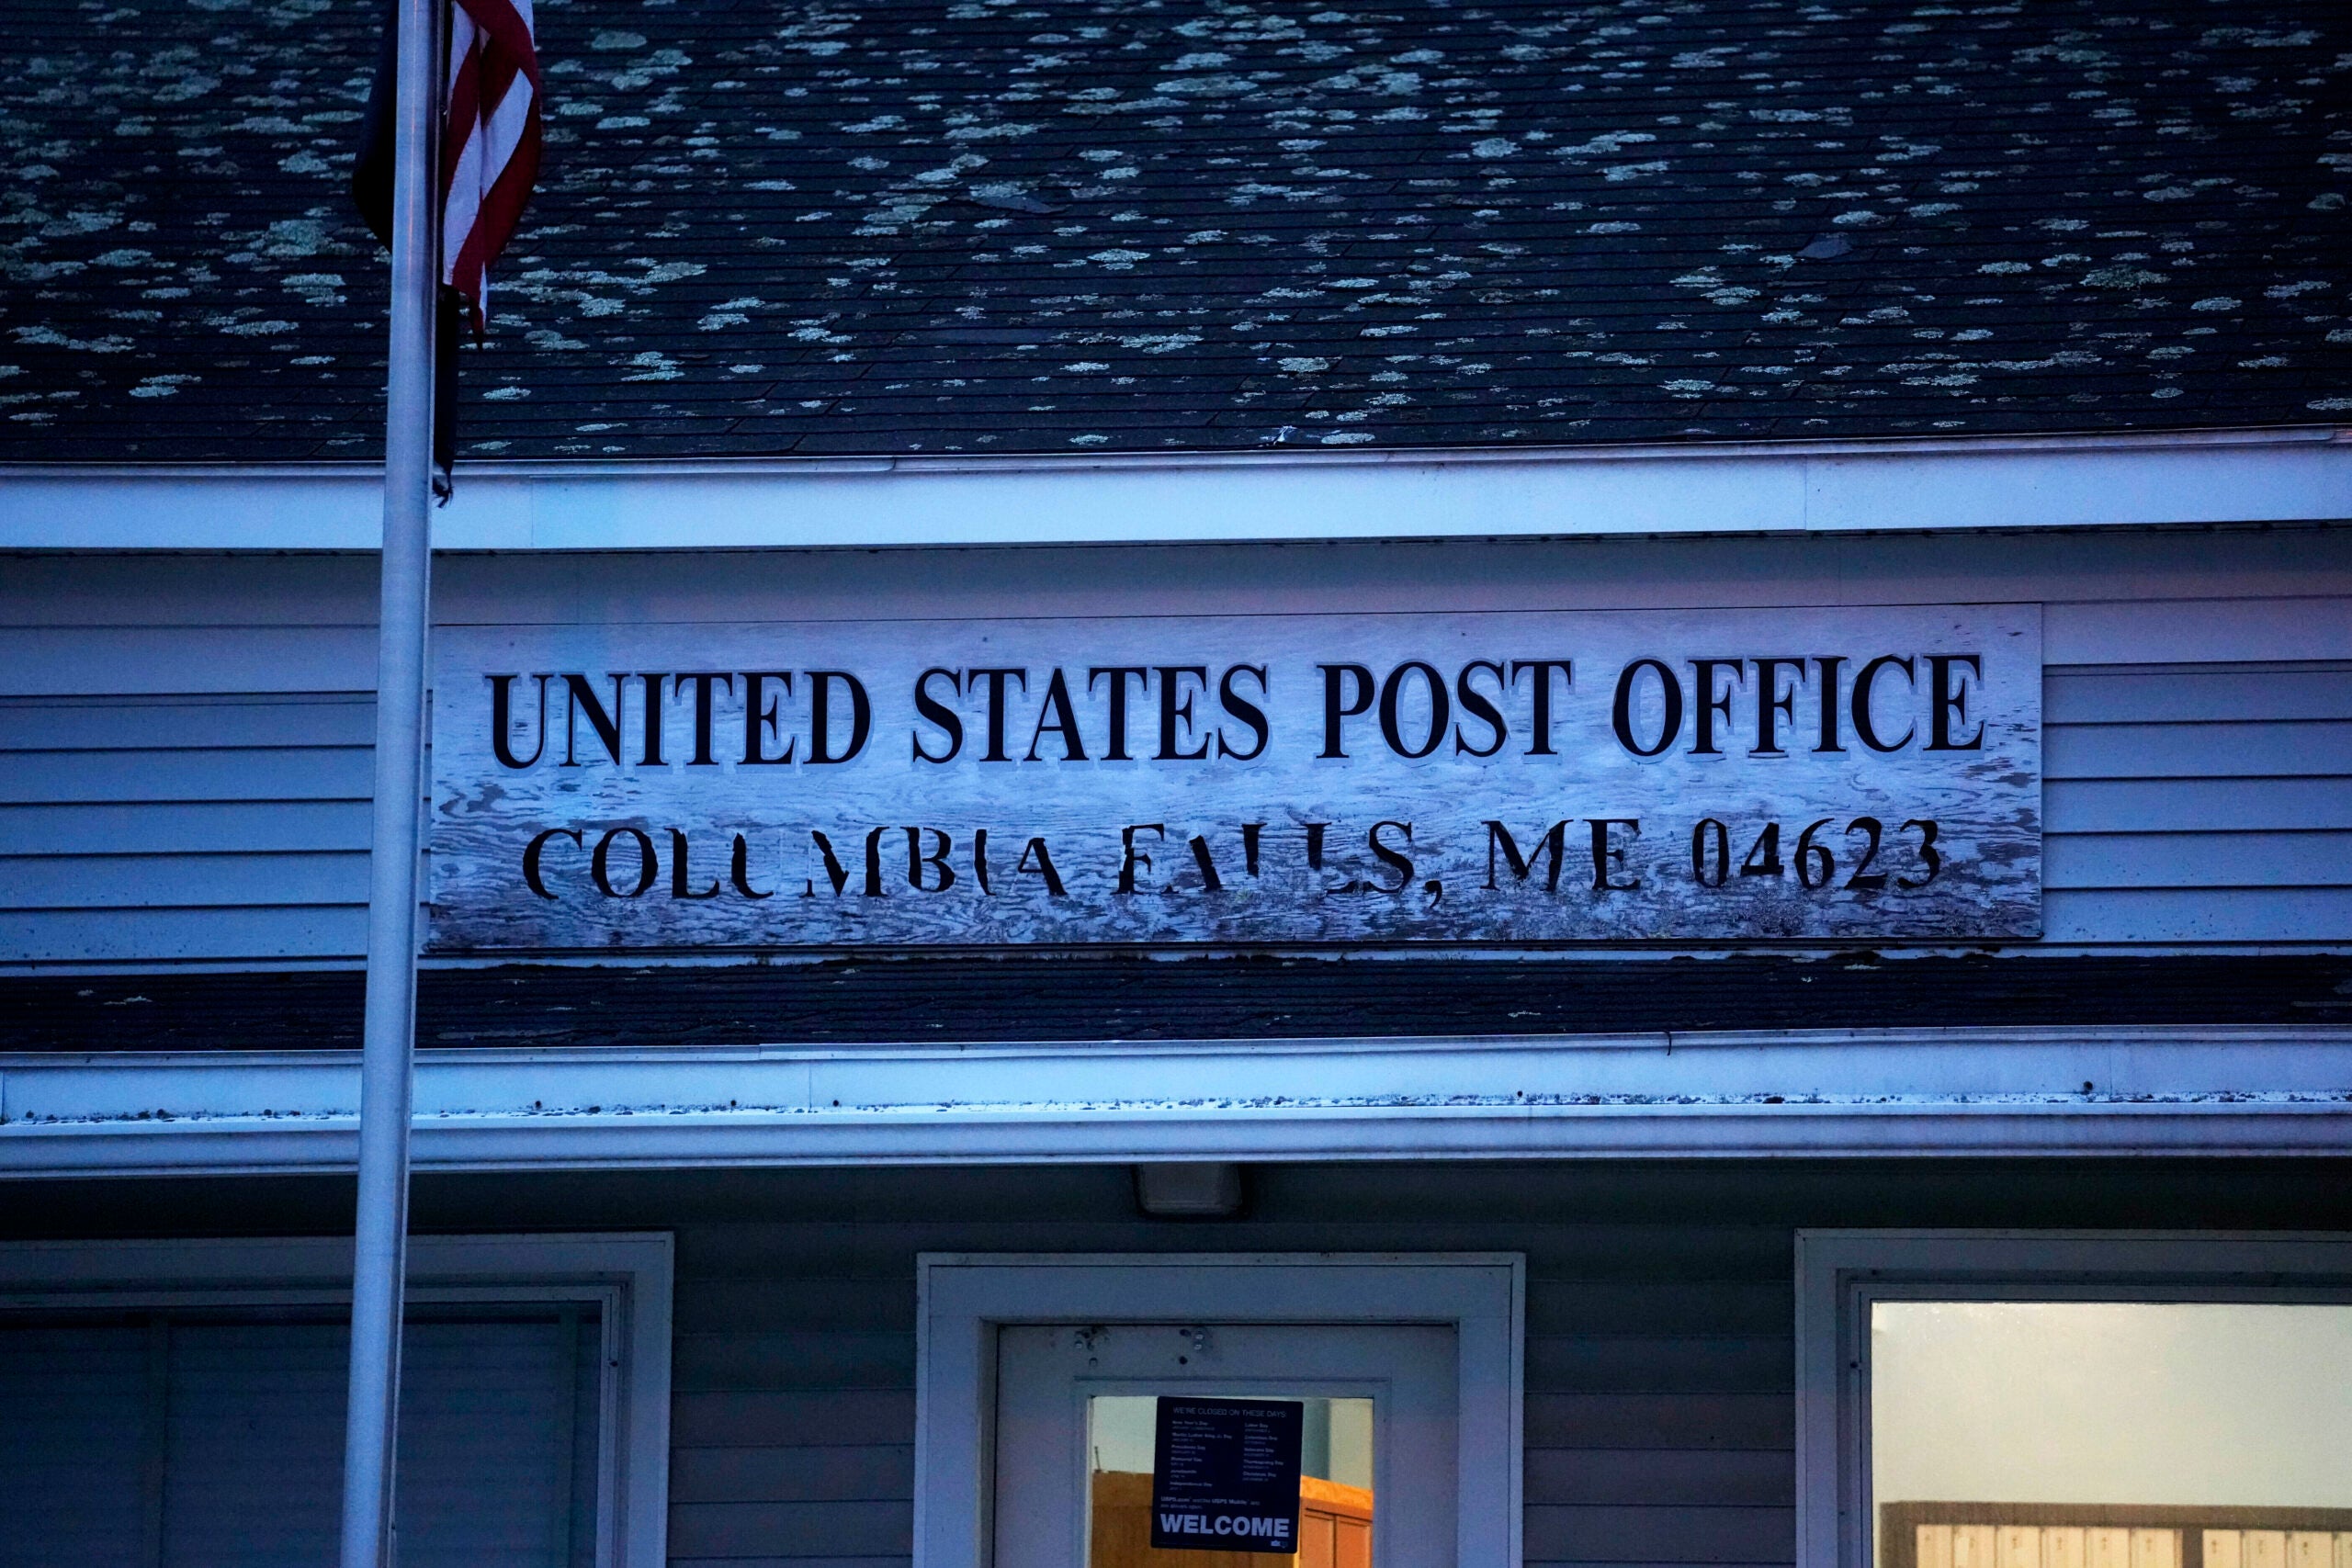 A weathered sign at the post office in Columbia Falls, Maine.